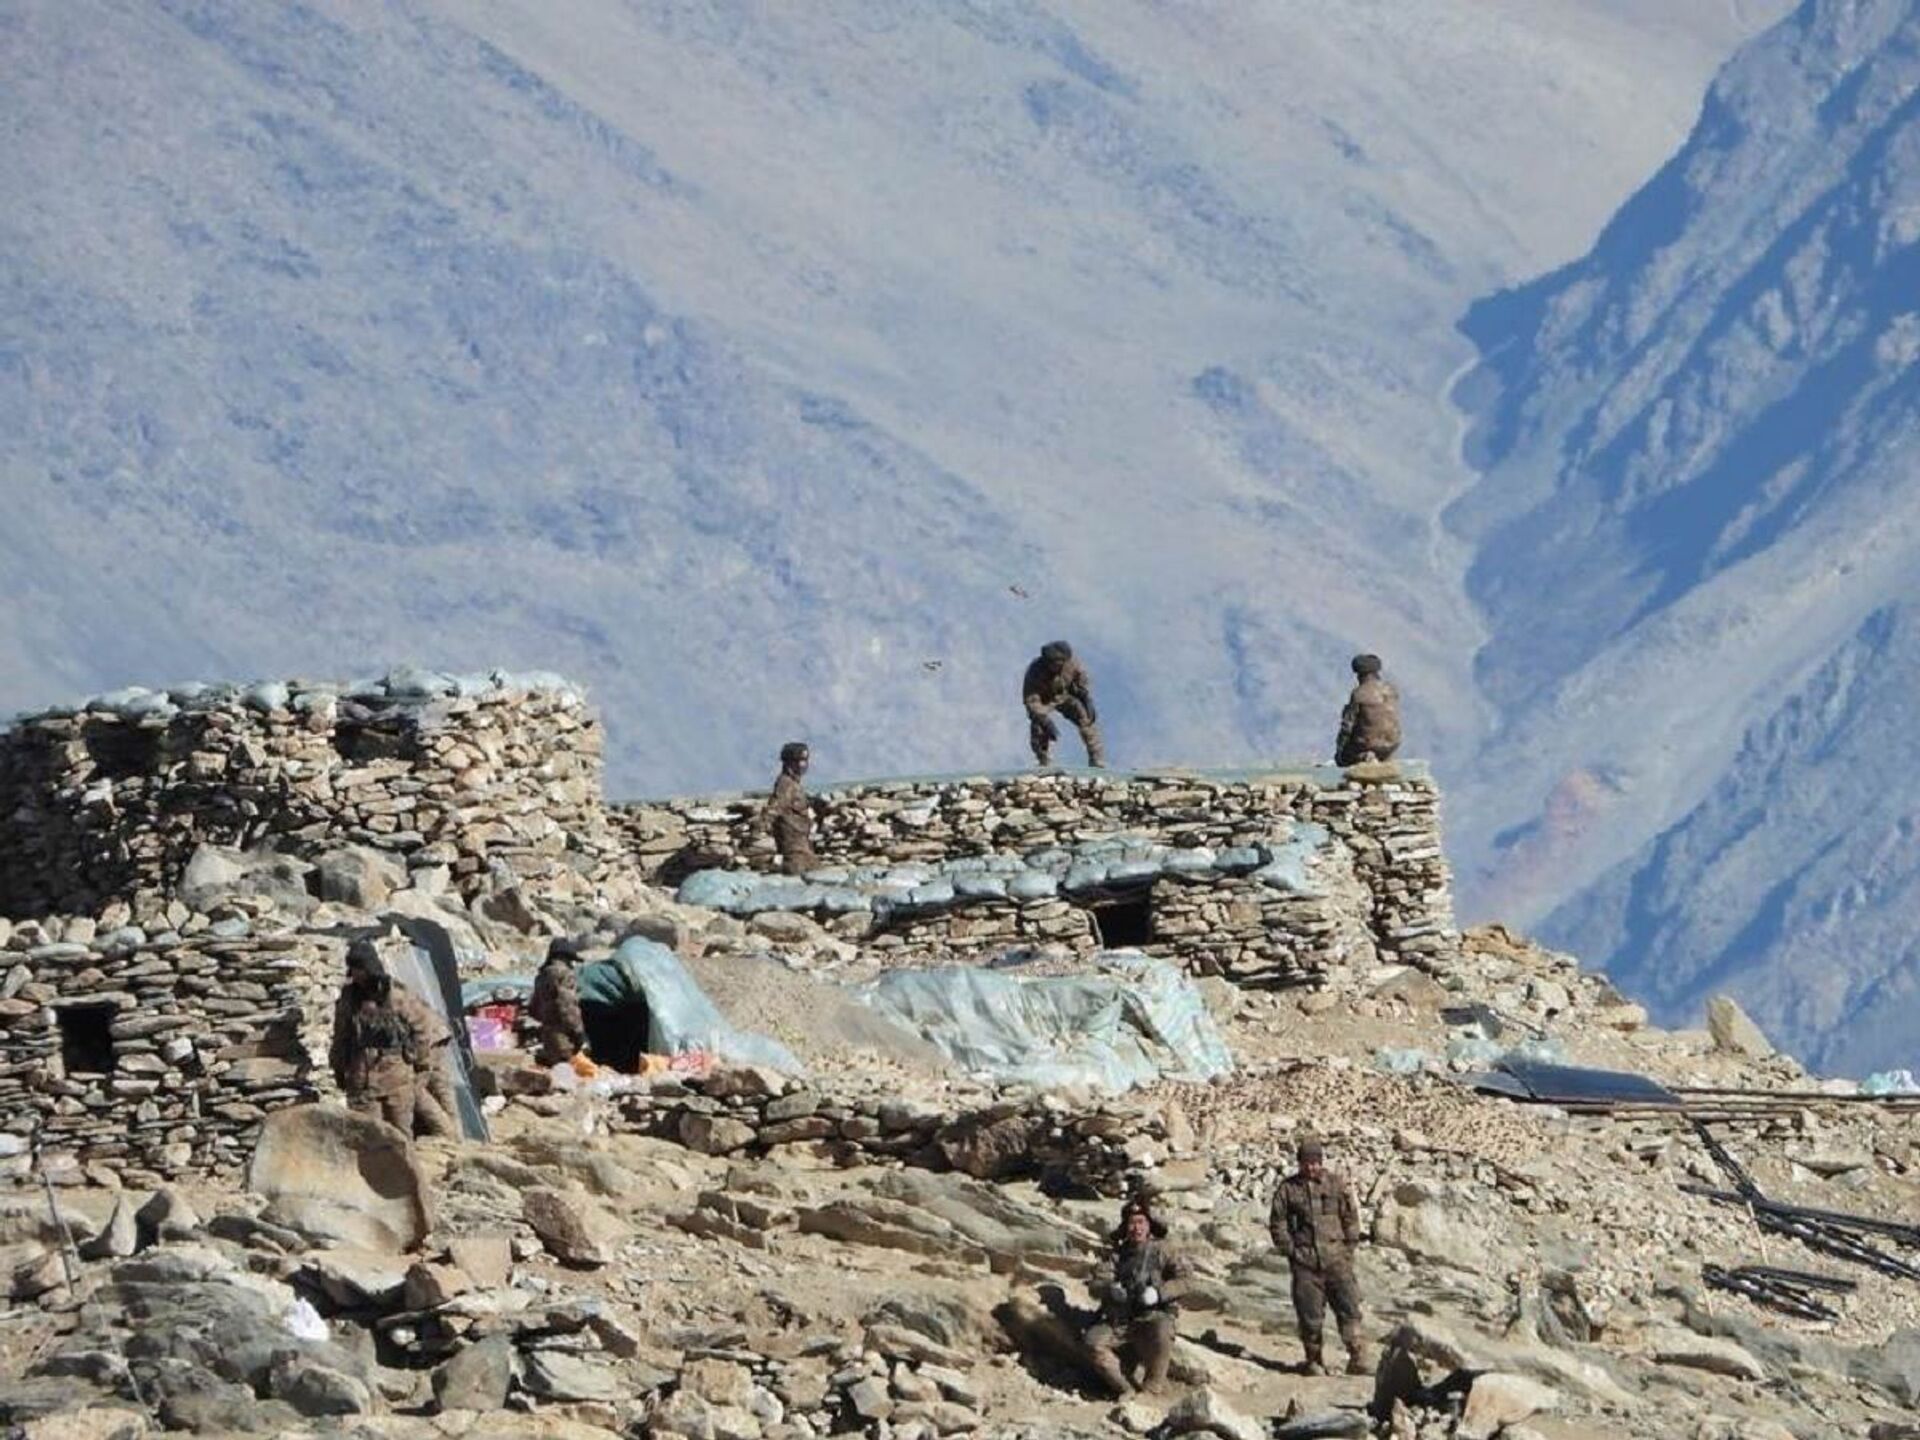 This photograph provided by the Indian Army, according to them shows Chinese troops dismantling their bunkers at Pangong Tso region, in Ladakh along the India-China border on Monday, Feb.15, 2021 - Sputnik India, 1920, 29.09.2023